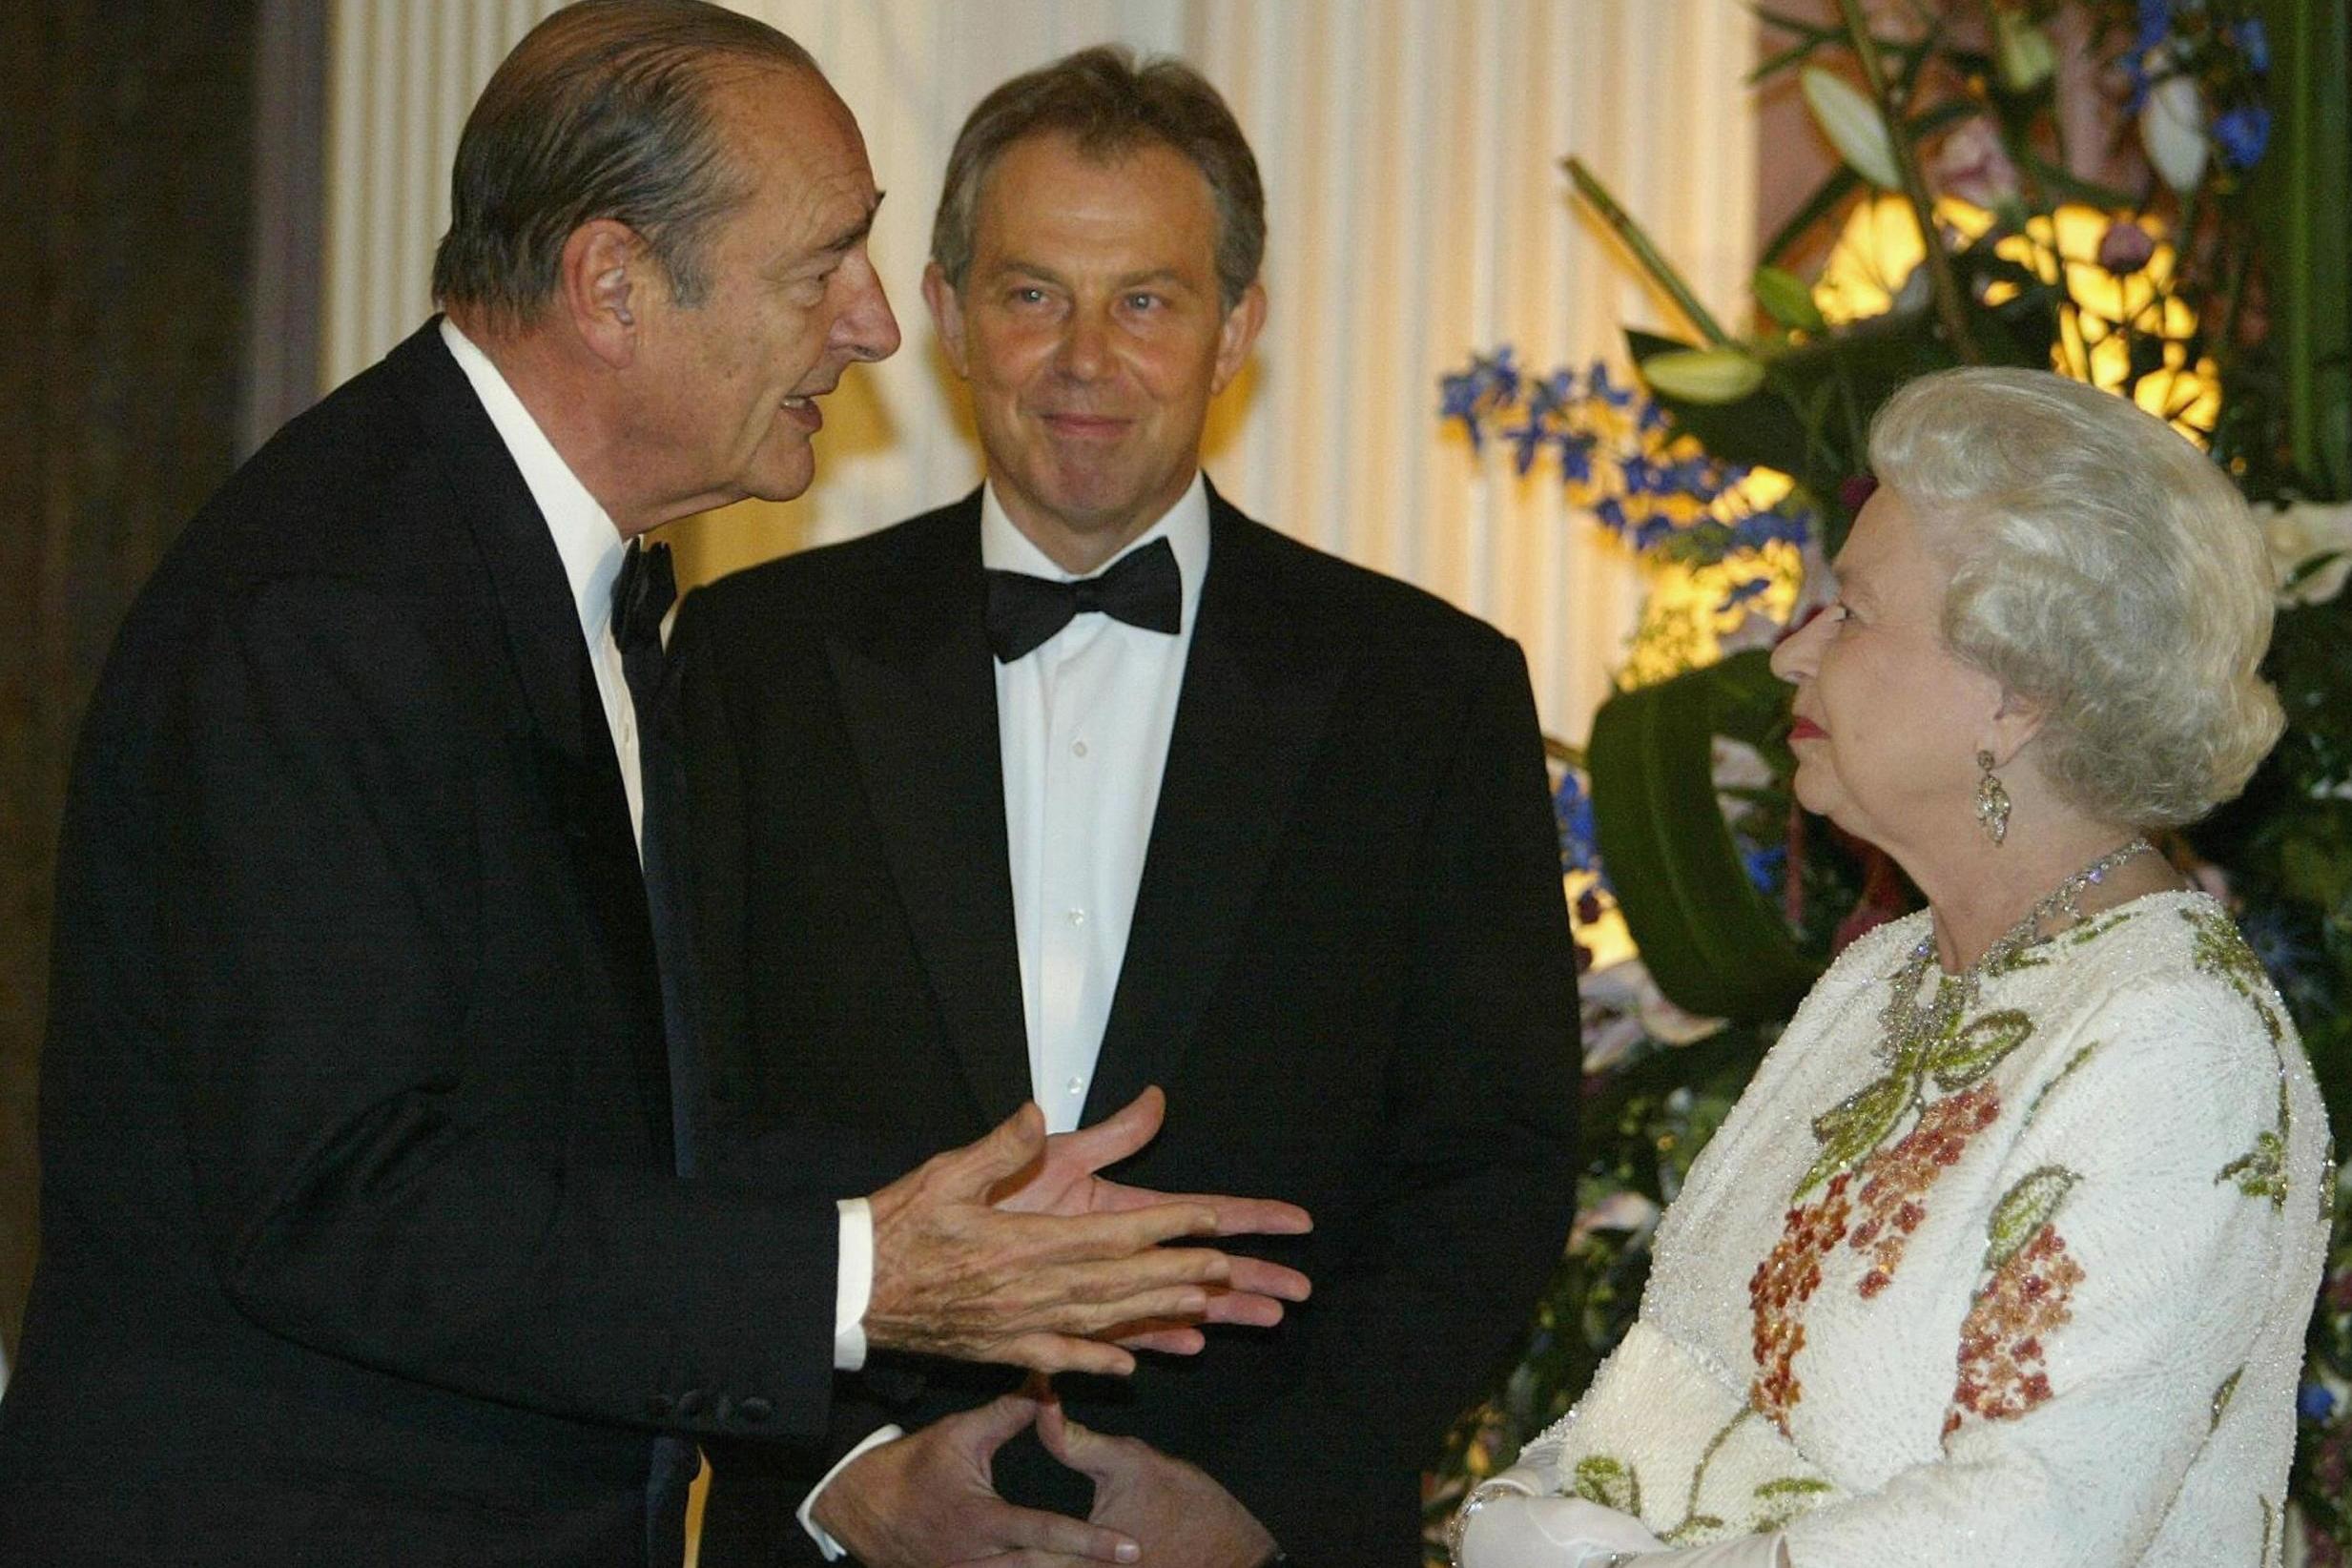 Dinner guests: Chirac and Blair in exalted company at Gleneagles in 2005